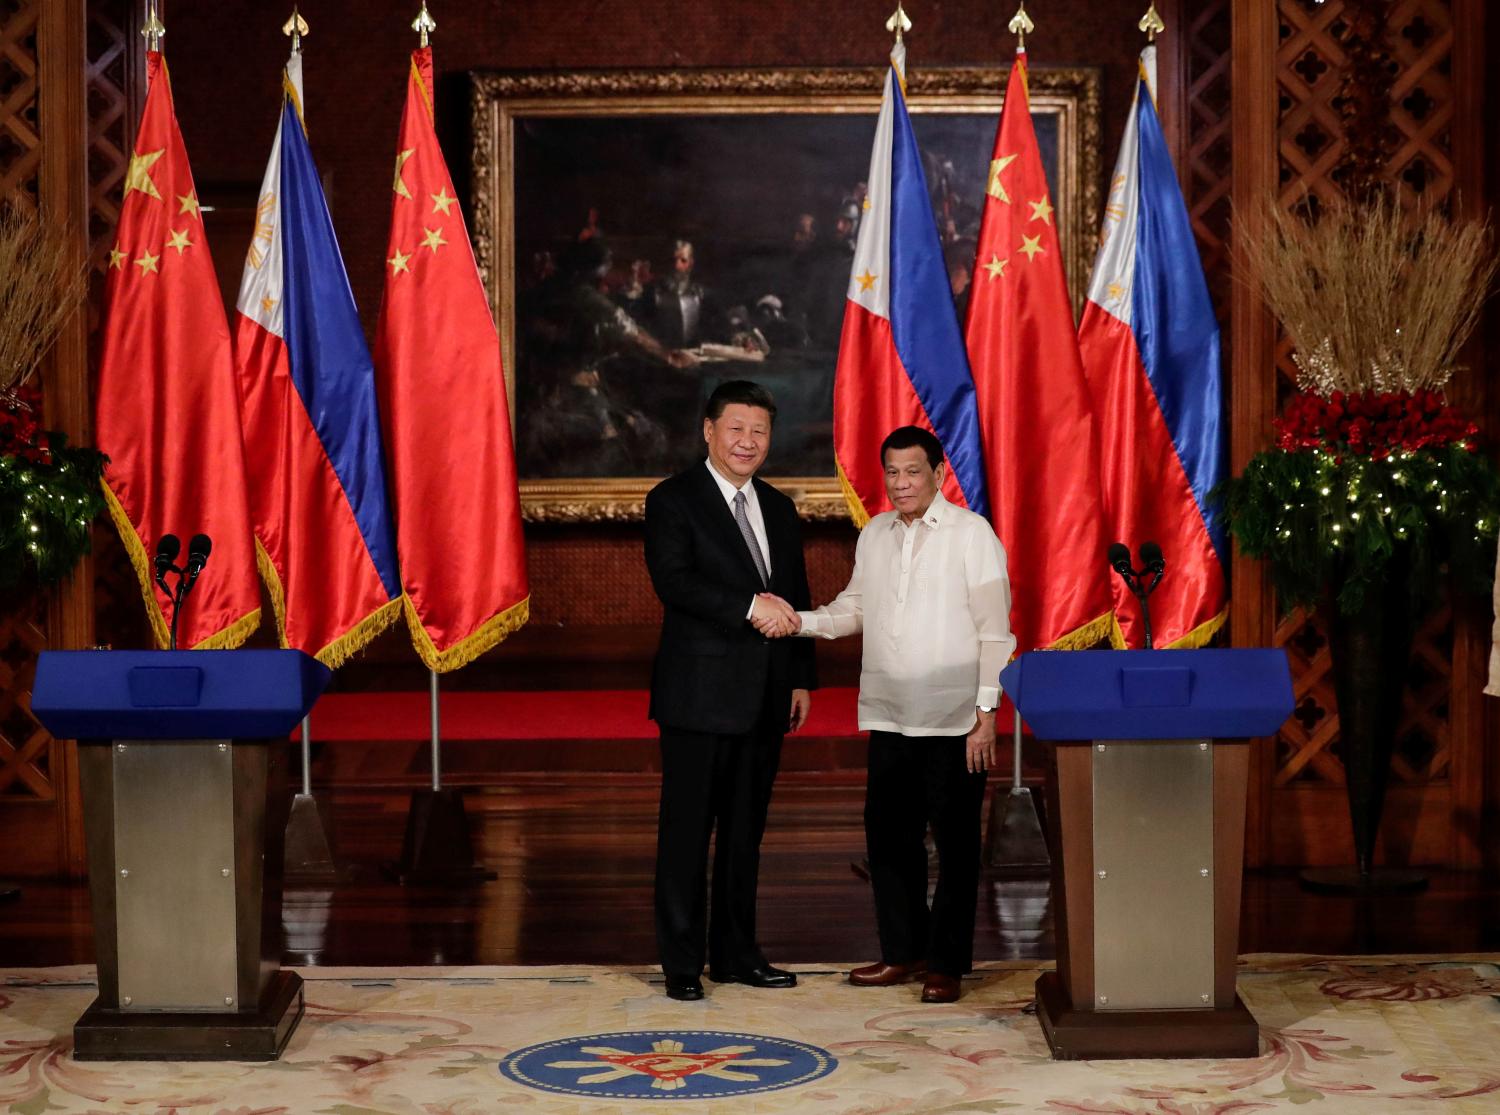 China's President Xi Jinping and Philippine President Rodrigo Duterte shake hands after a joint news statement at the Malacanang presidential palace in Manila, Philippines, November 20, 2018. Mark Cristino/Pool via Reuters - RC1AC68D9E90